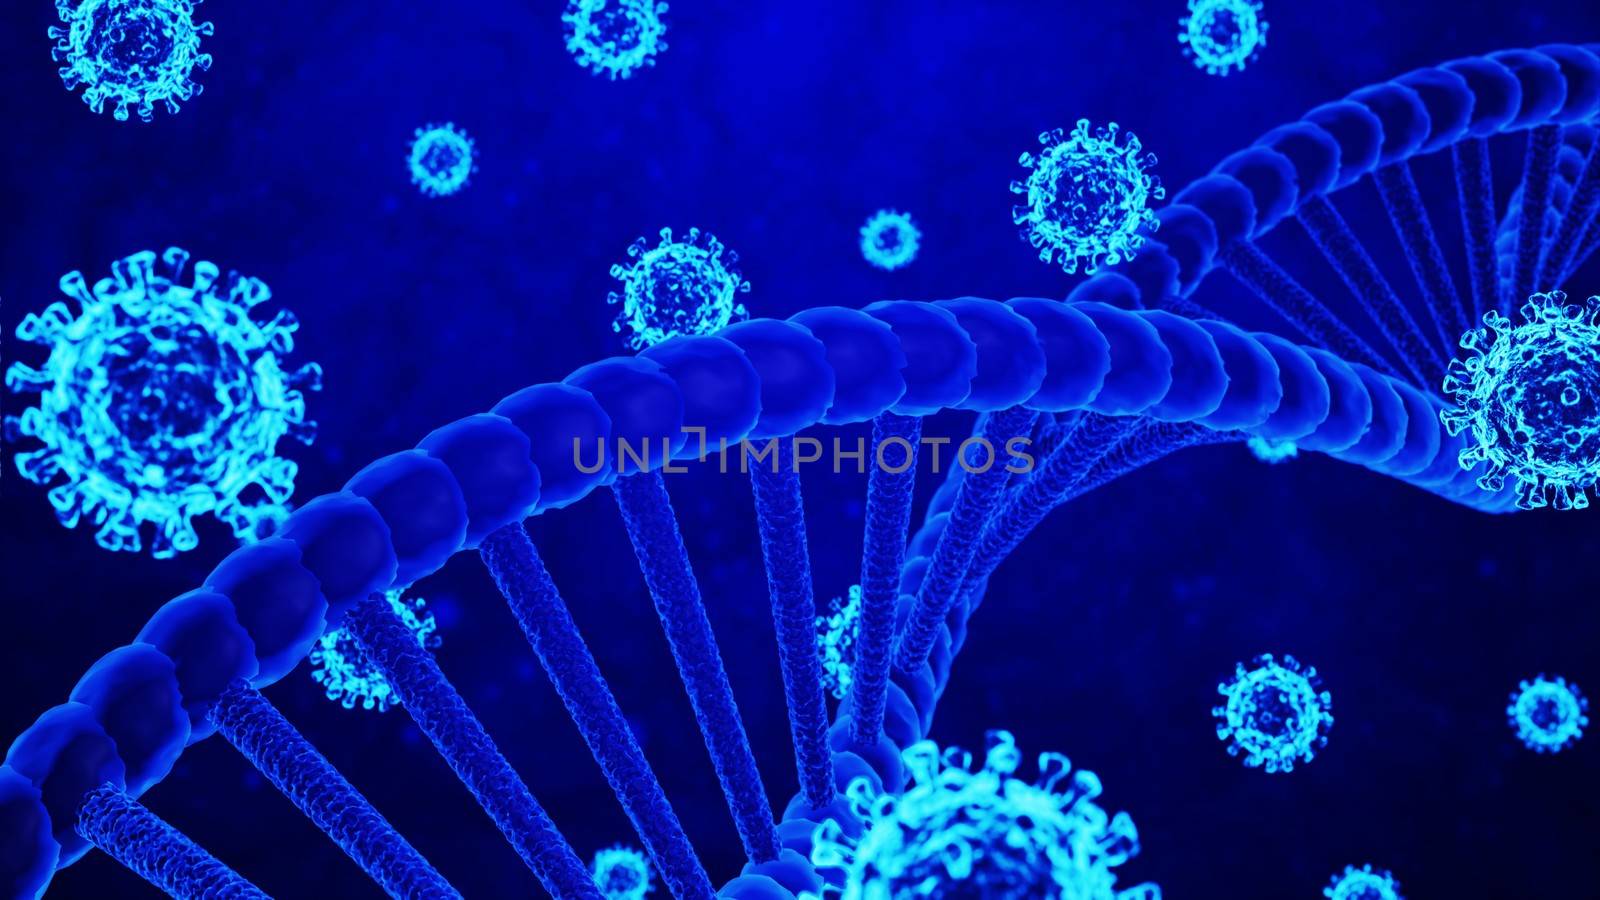 3D Rendering Coronavirus/COVID-19 and DNA Helix Models Rotating in Abstract Moving Blue Background and Particles Still Image by ariya23156